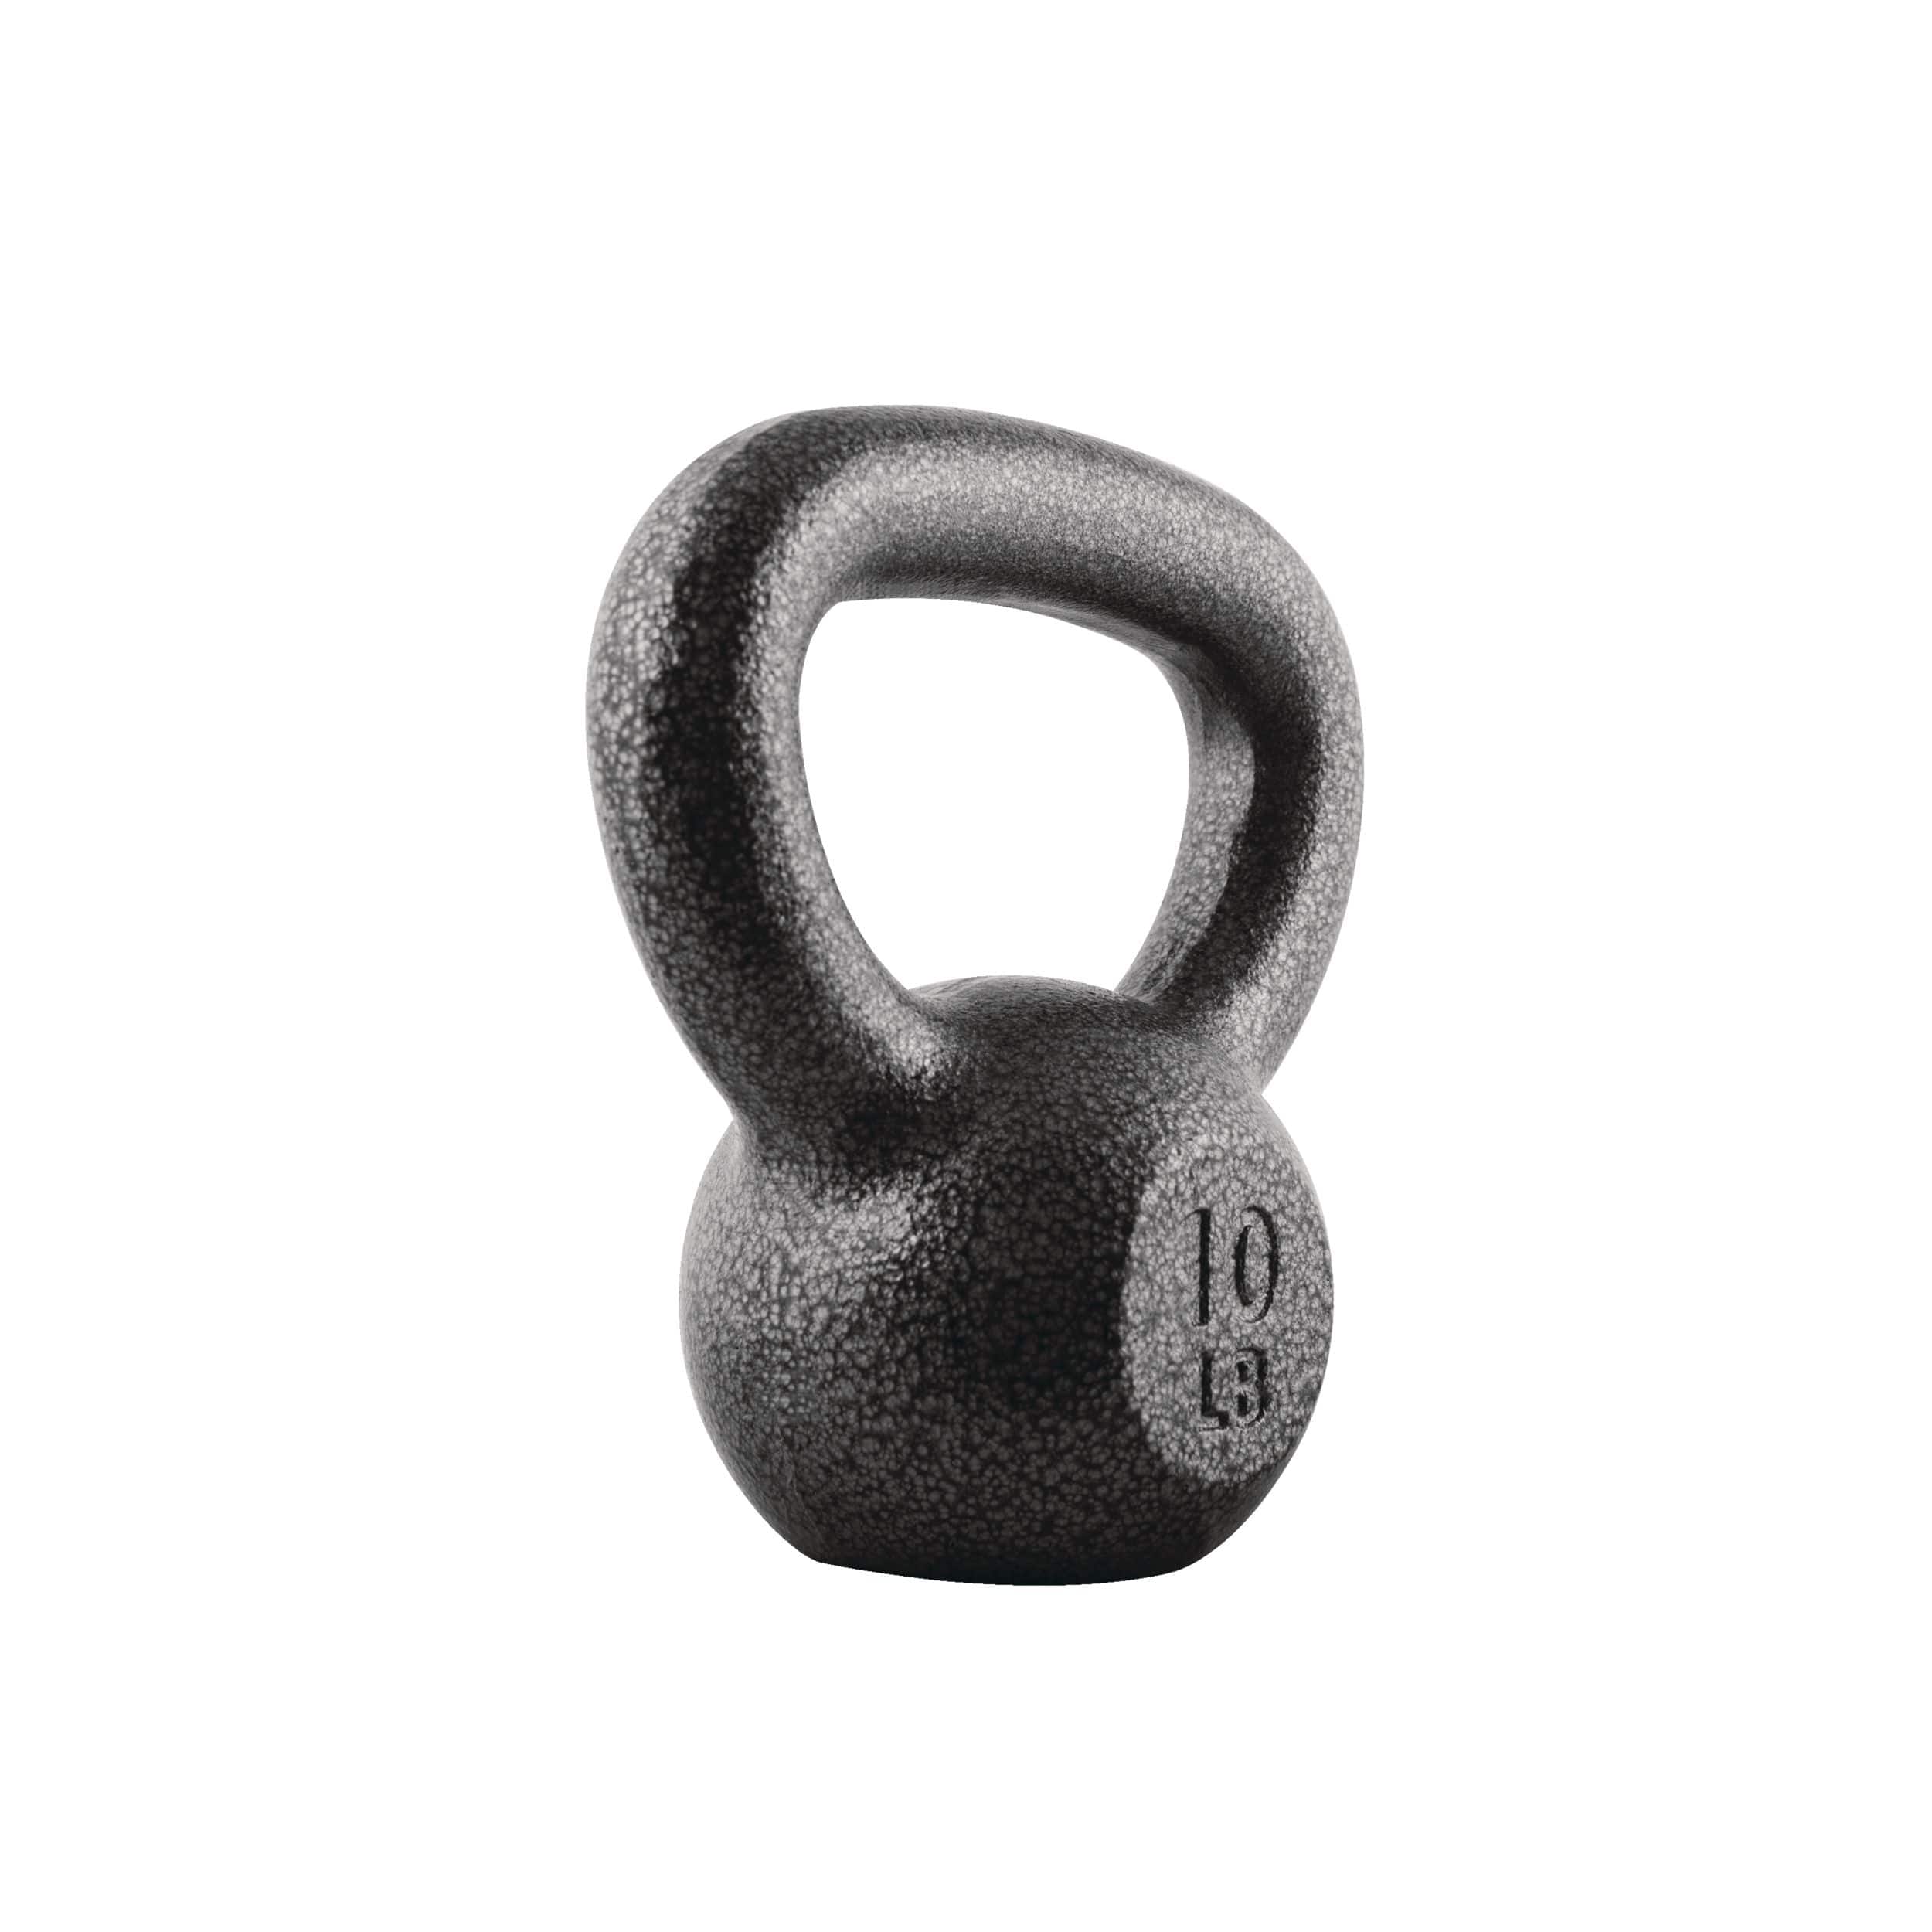 https://media-www.canadiantire.ca/product/playing/exercise/exercise-accessories/0840932/10lb-cast-kettlebell-ad1baa14-f5cf-43c7-812e-fe4b30f636a9-jpgrendition.jpg